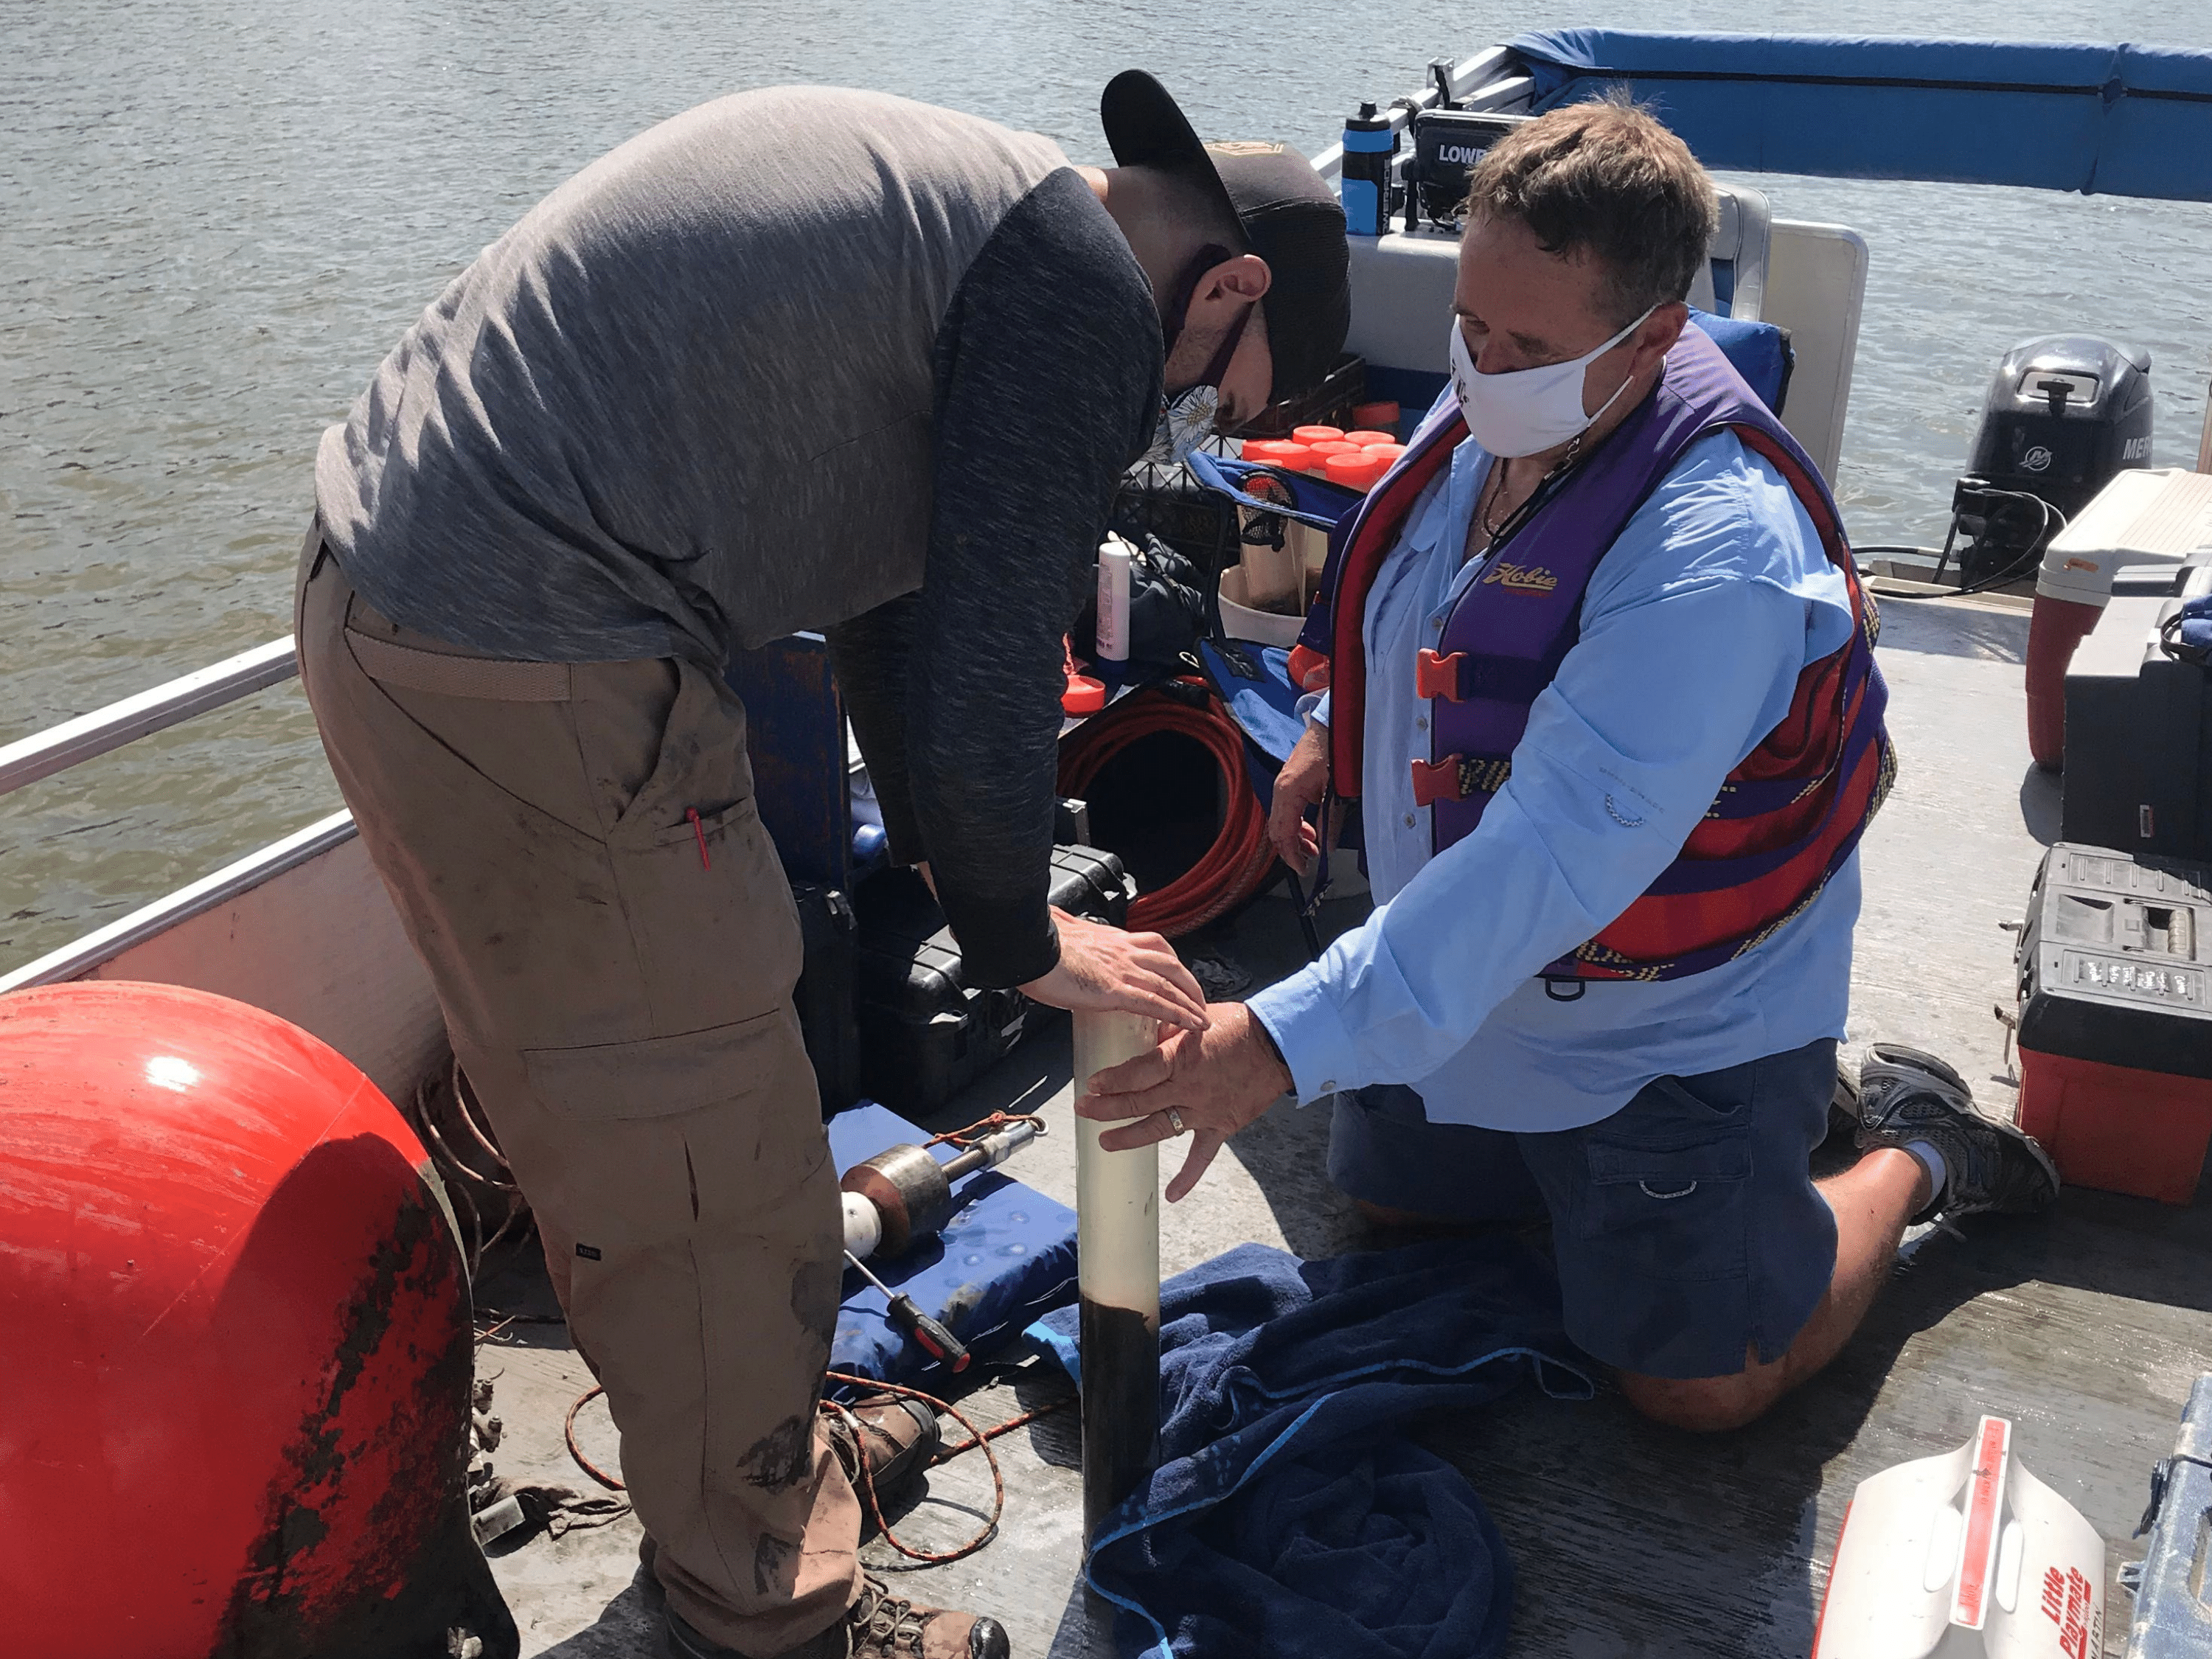 Dr. Brian Bohnsack (right) works with a team of researchers to collect blue-green algae samples from Marion Reservoir in Kansas.